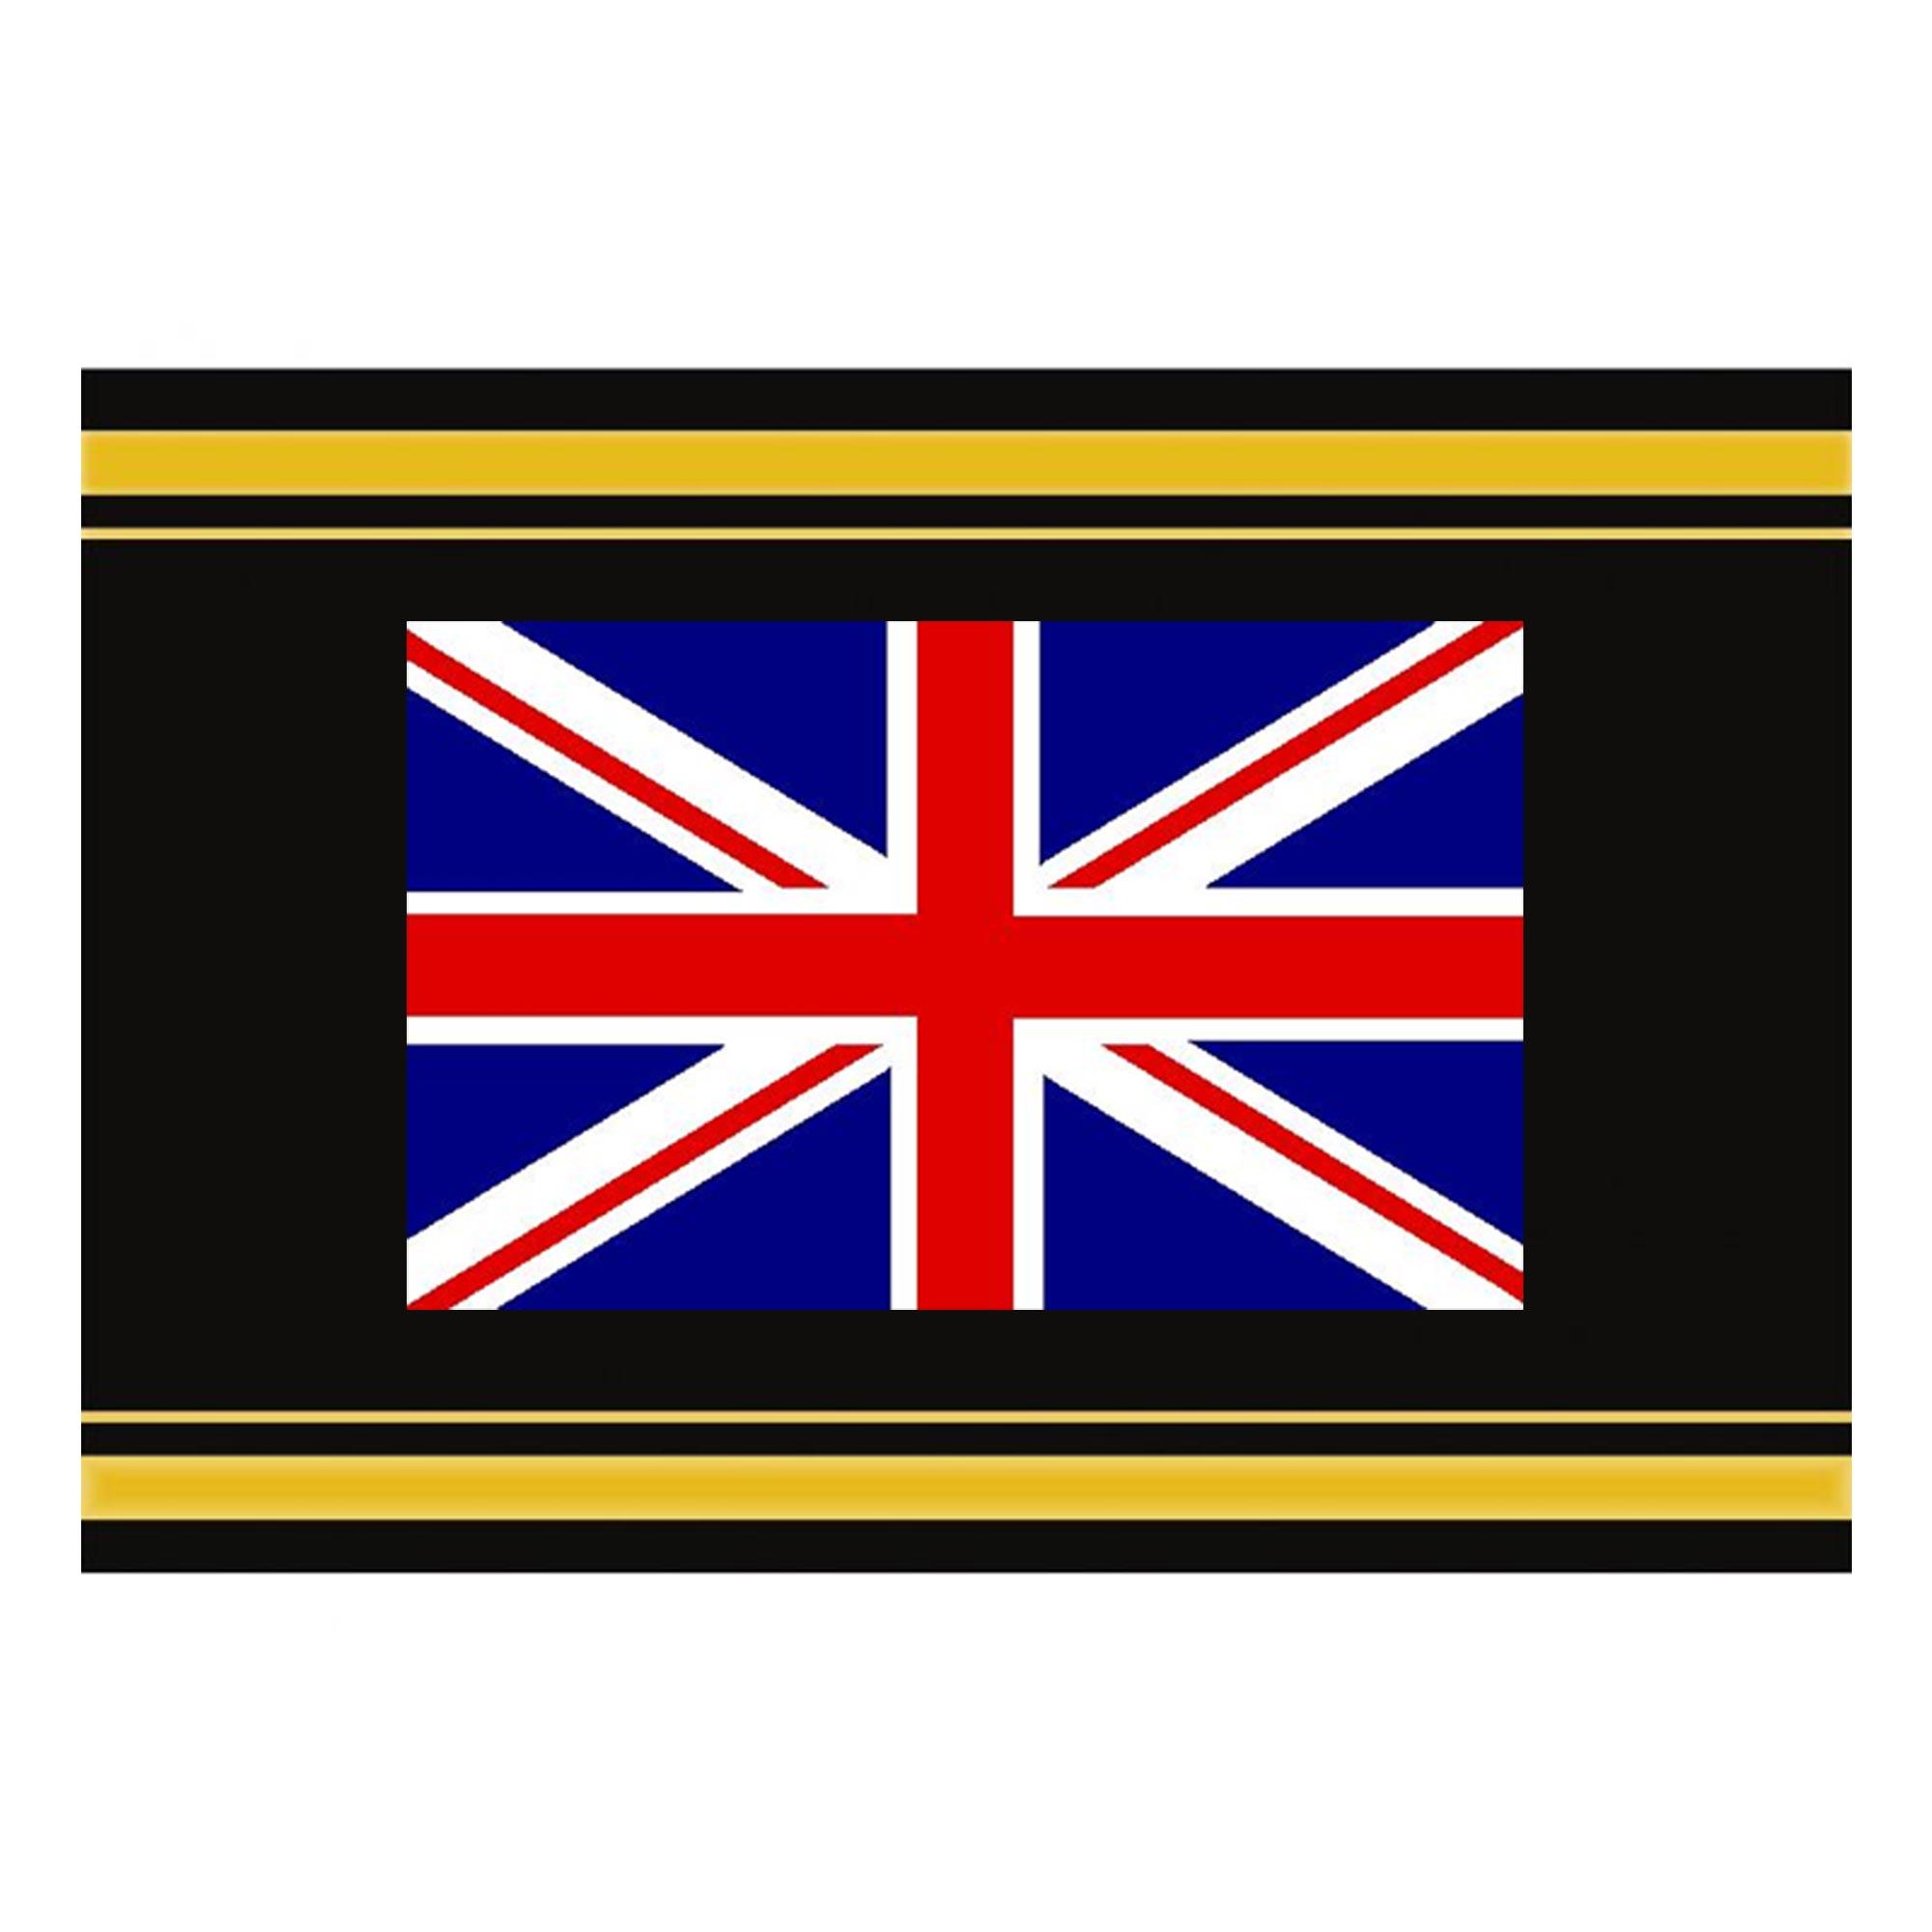 Black-Gold Album Label with Country Flags - UK Union Flag